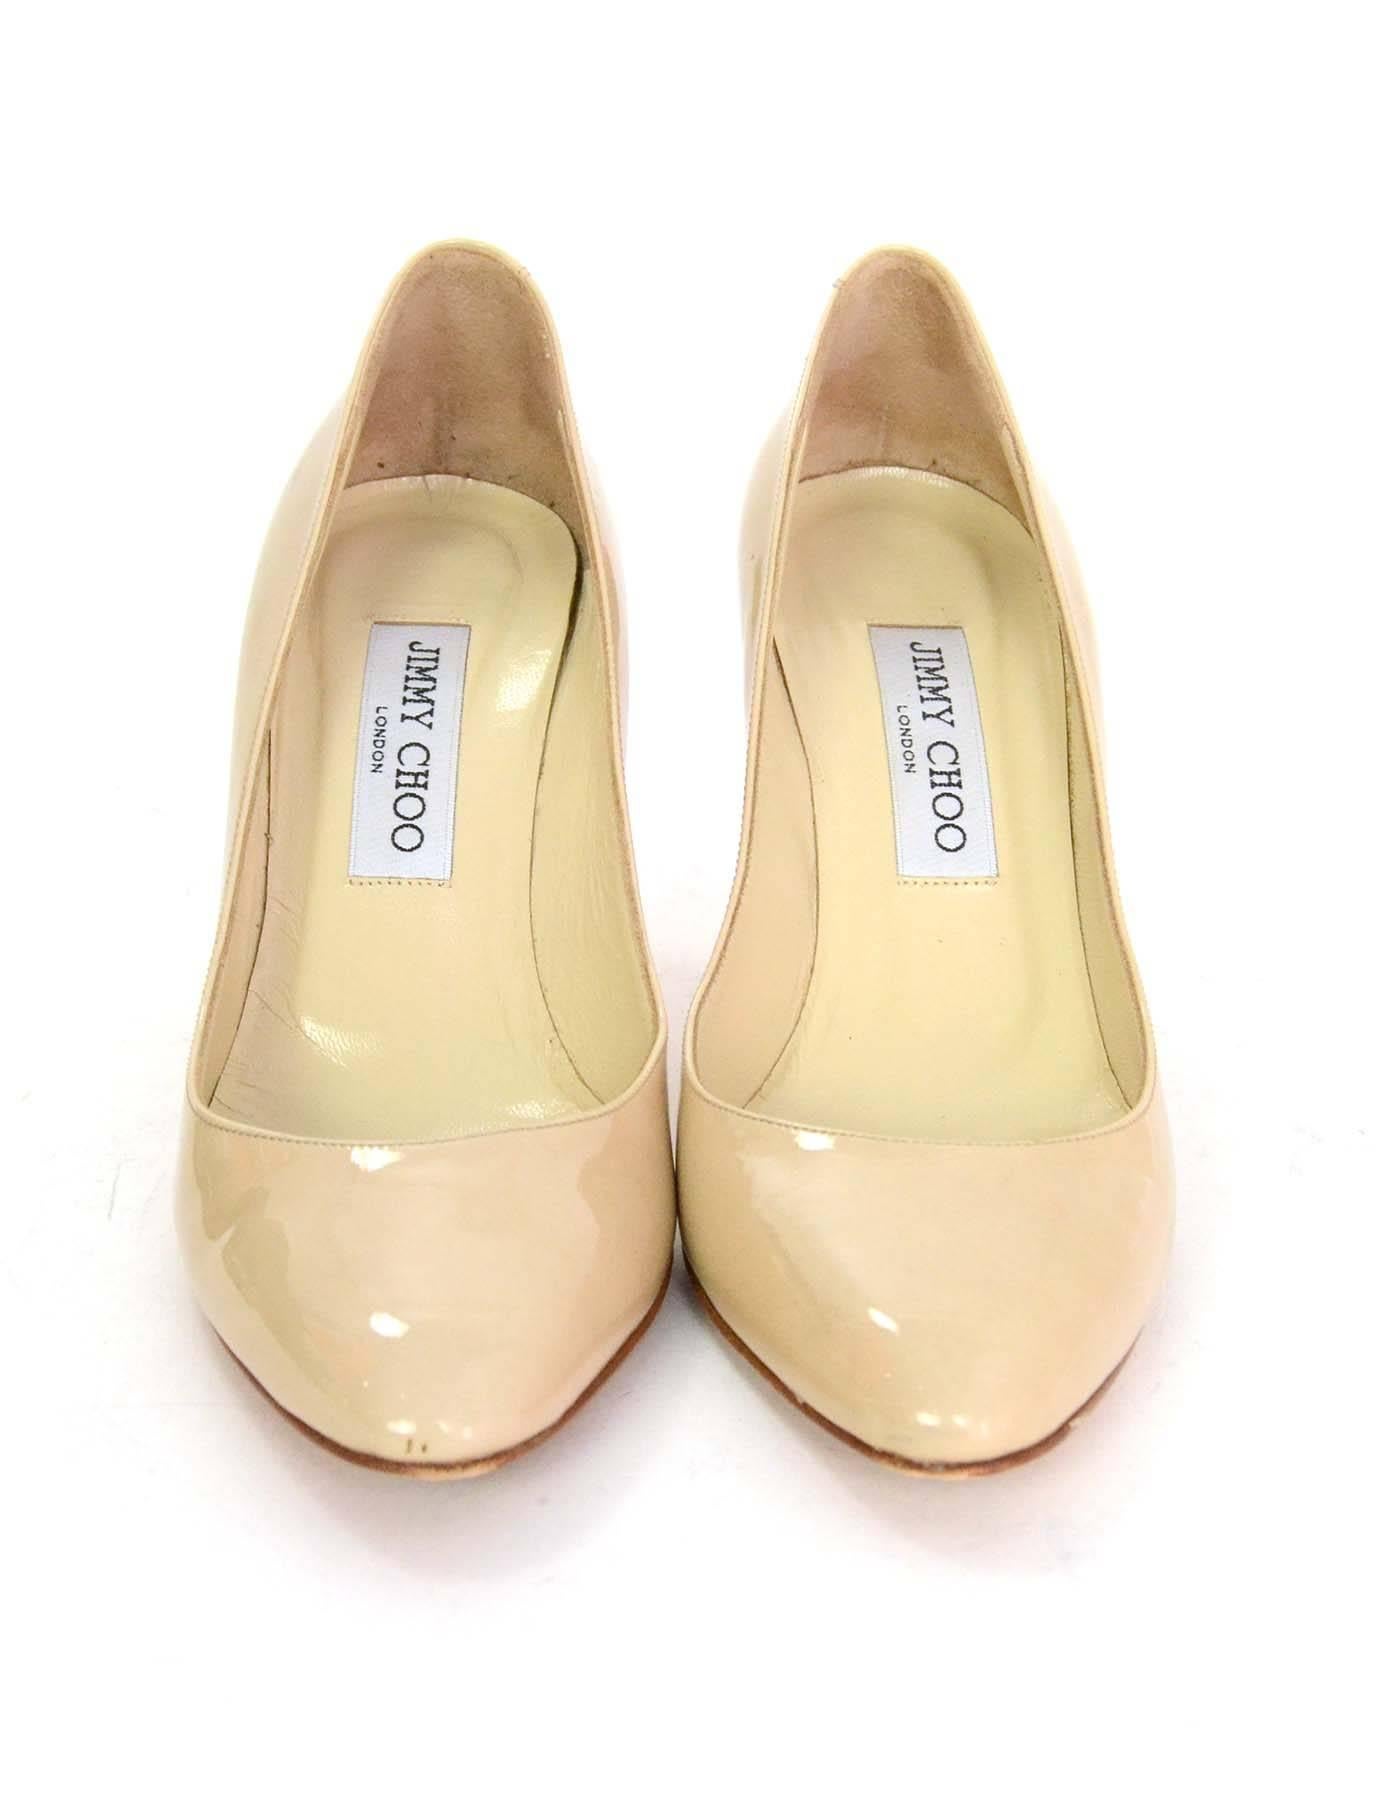 Jimmy Choo Nude Patent Leather Almond Toe Pumps sz 37.5 In Excellent Condition In New York, NY